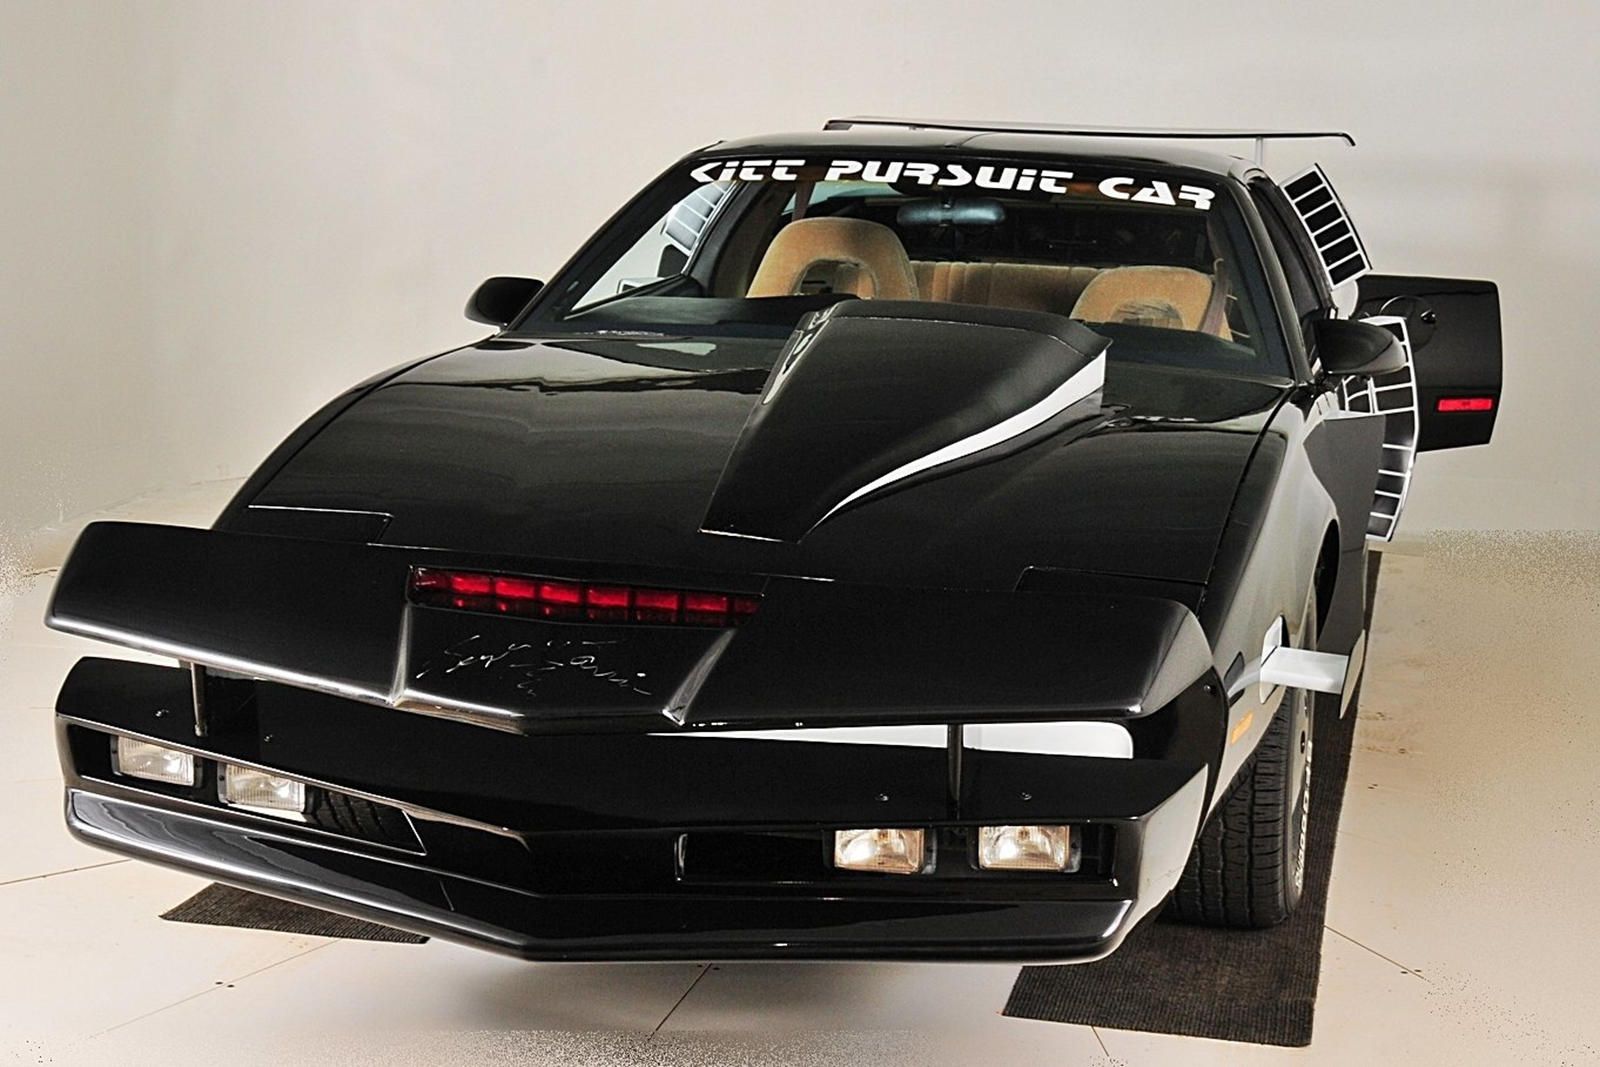 The original KITT from Knight Rider was based on a Trans Am